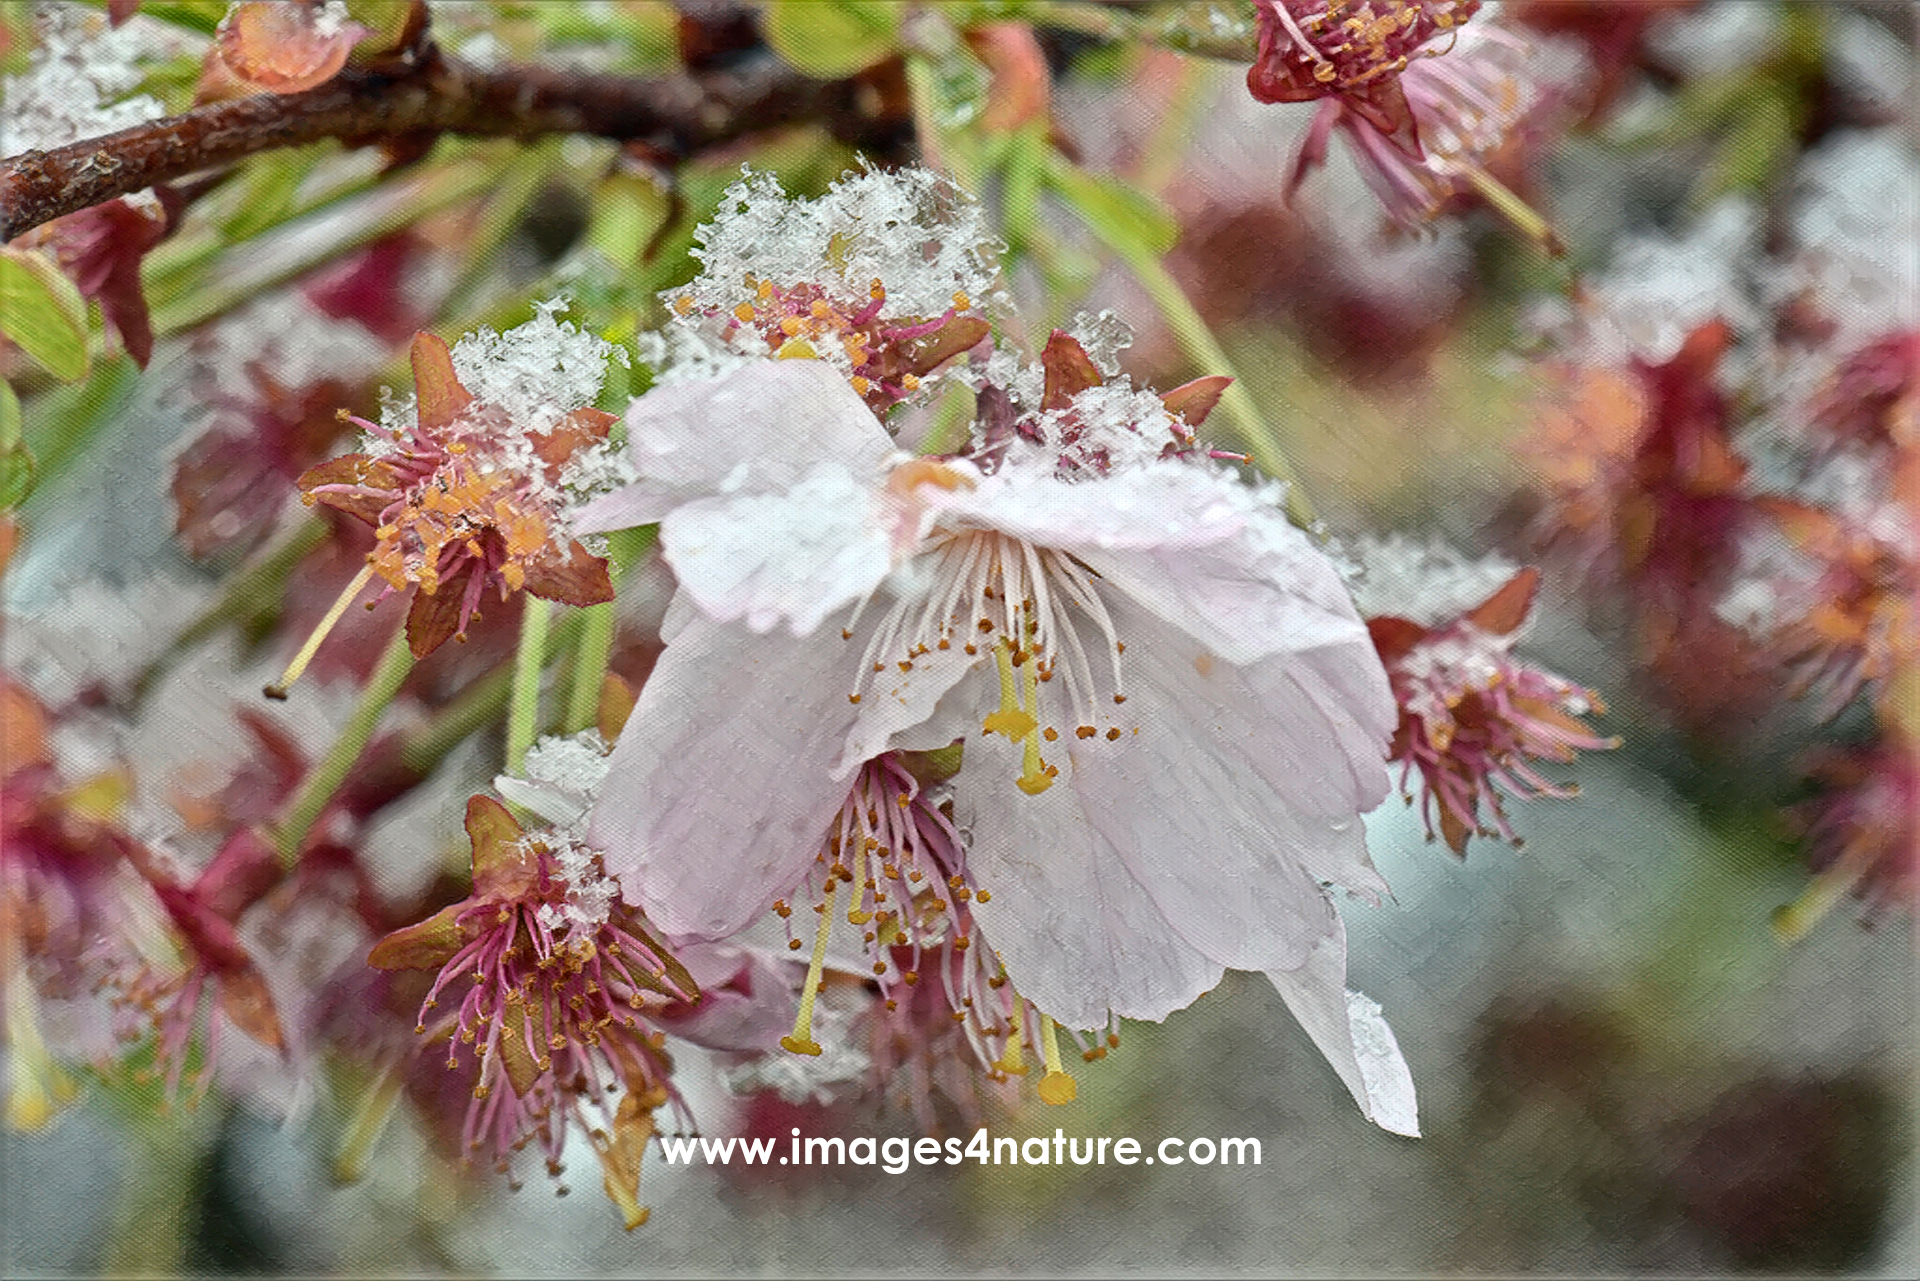 Red and pink cherry blossoms covered with snowflakes